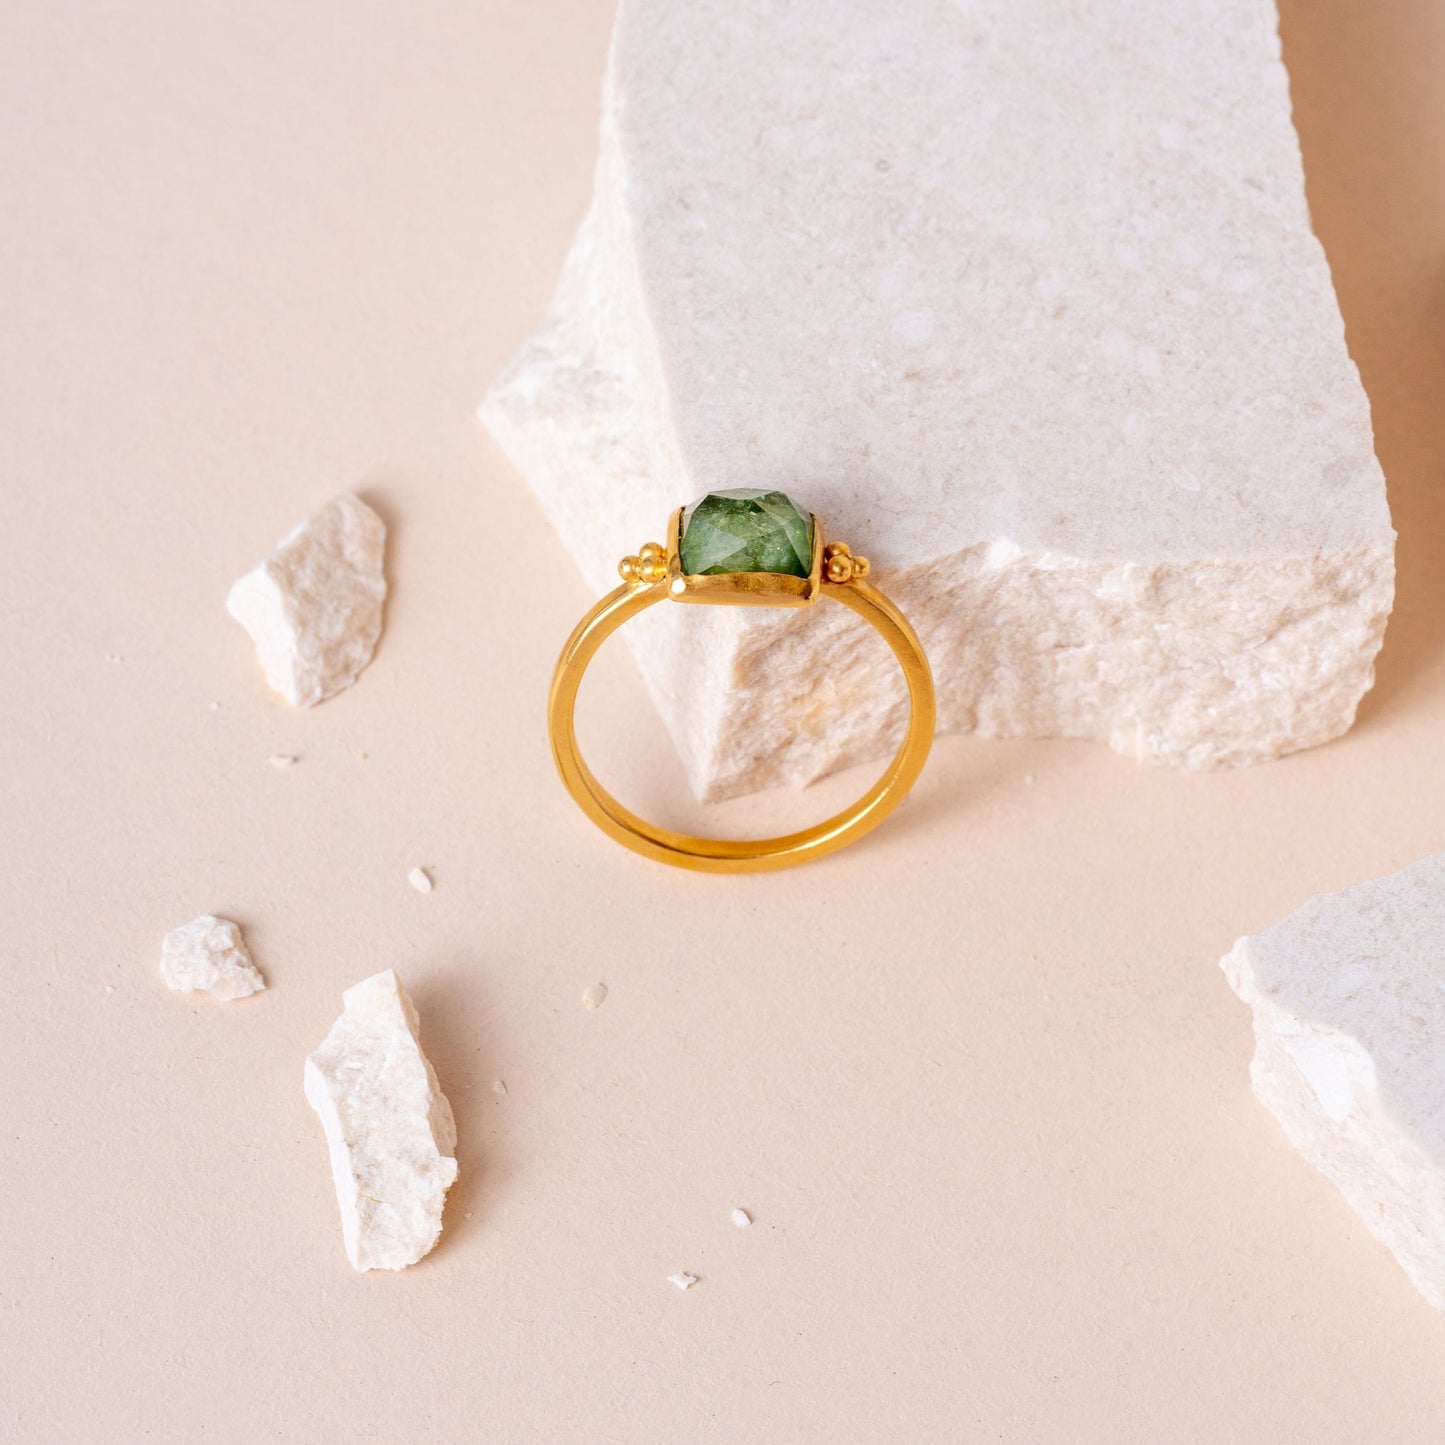 Artisan gold ring with delicate granulation patterns, highlighting a unique green rose-cut square tourmaline centrepiece